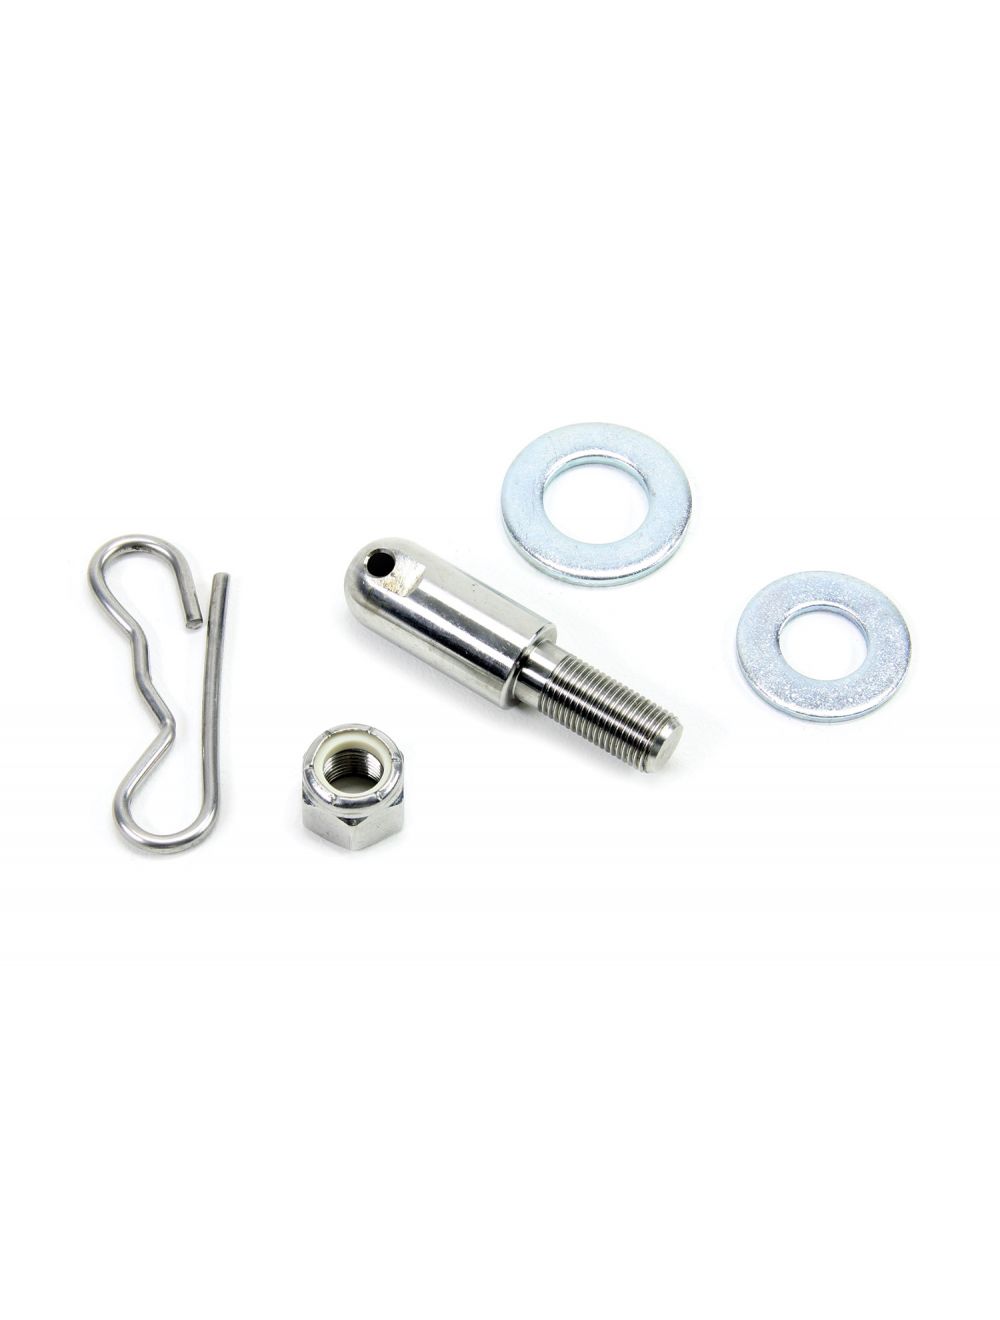 3/4” Stud Kit – Lower (w/ Nut, Hitch Pin Clip, & Washers) – Quick Disconnect 1943705